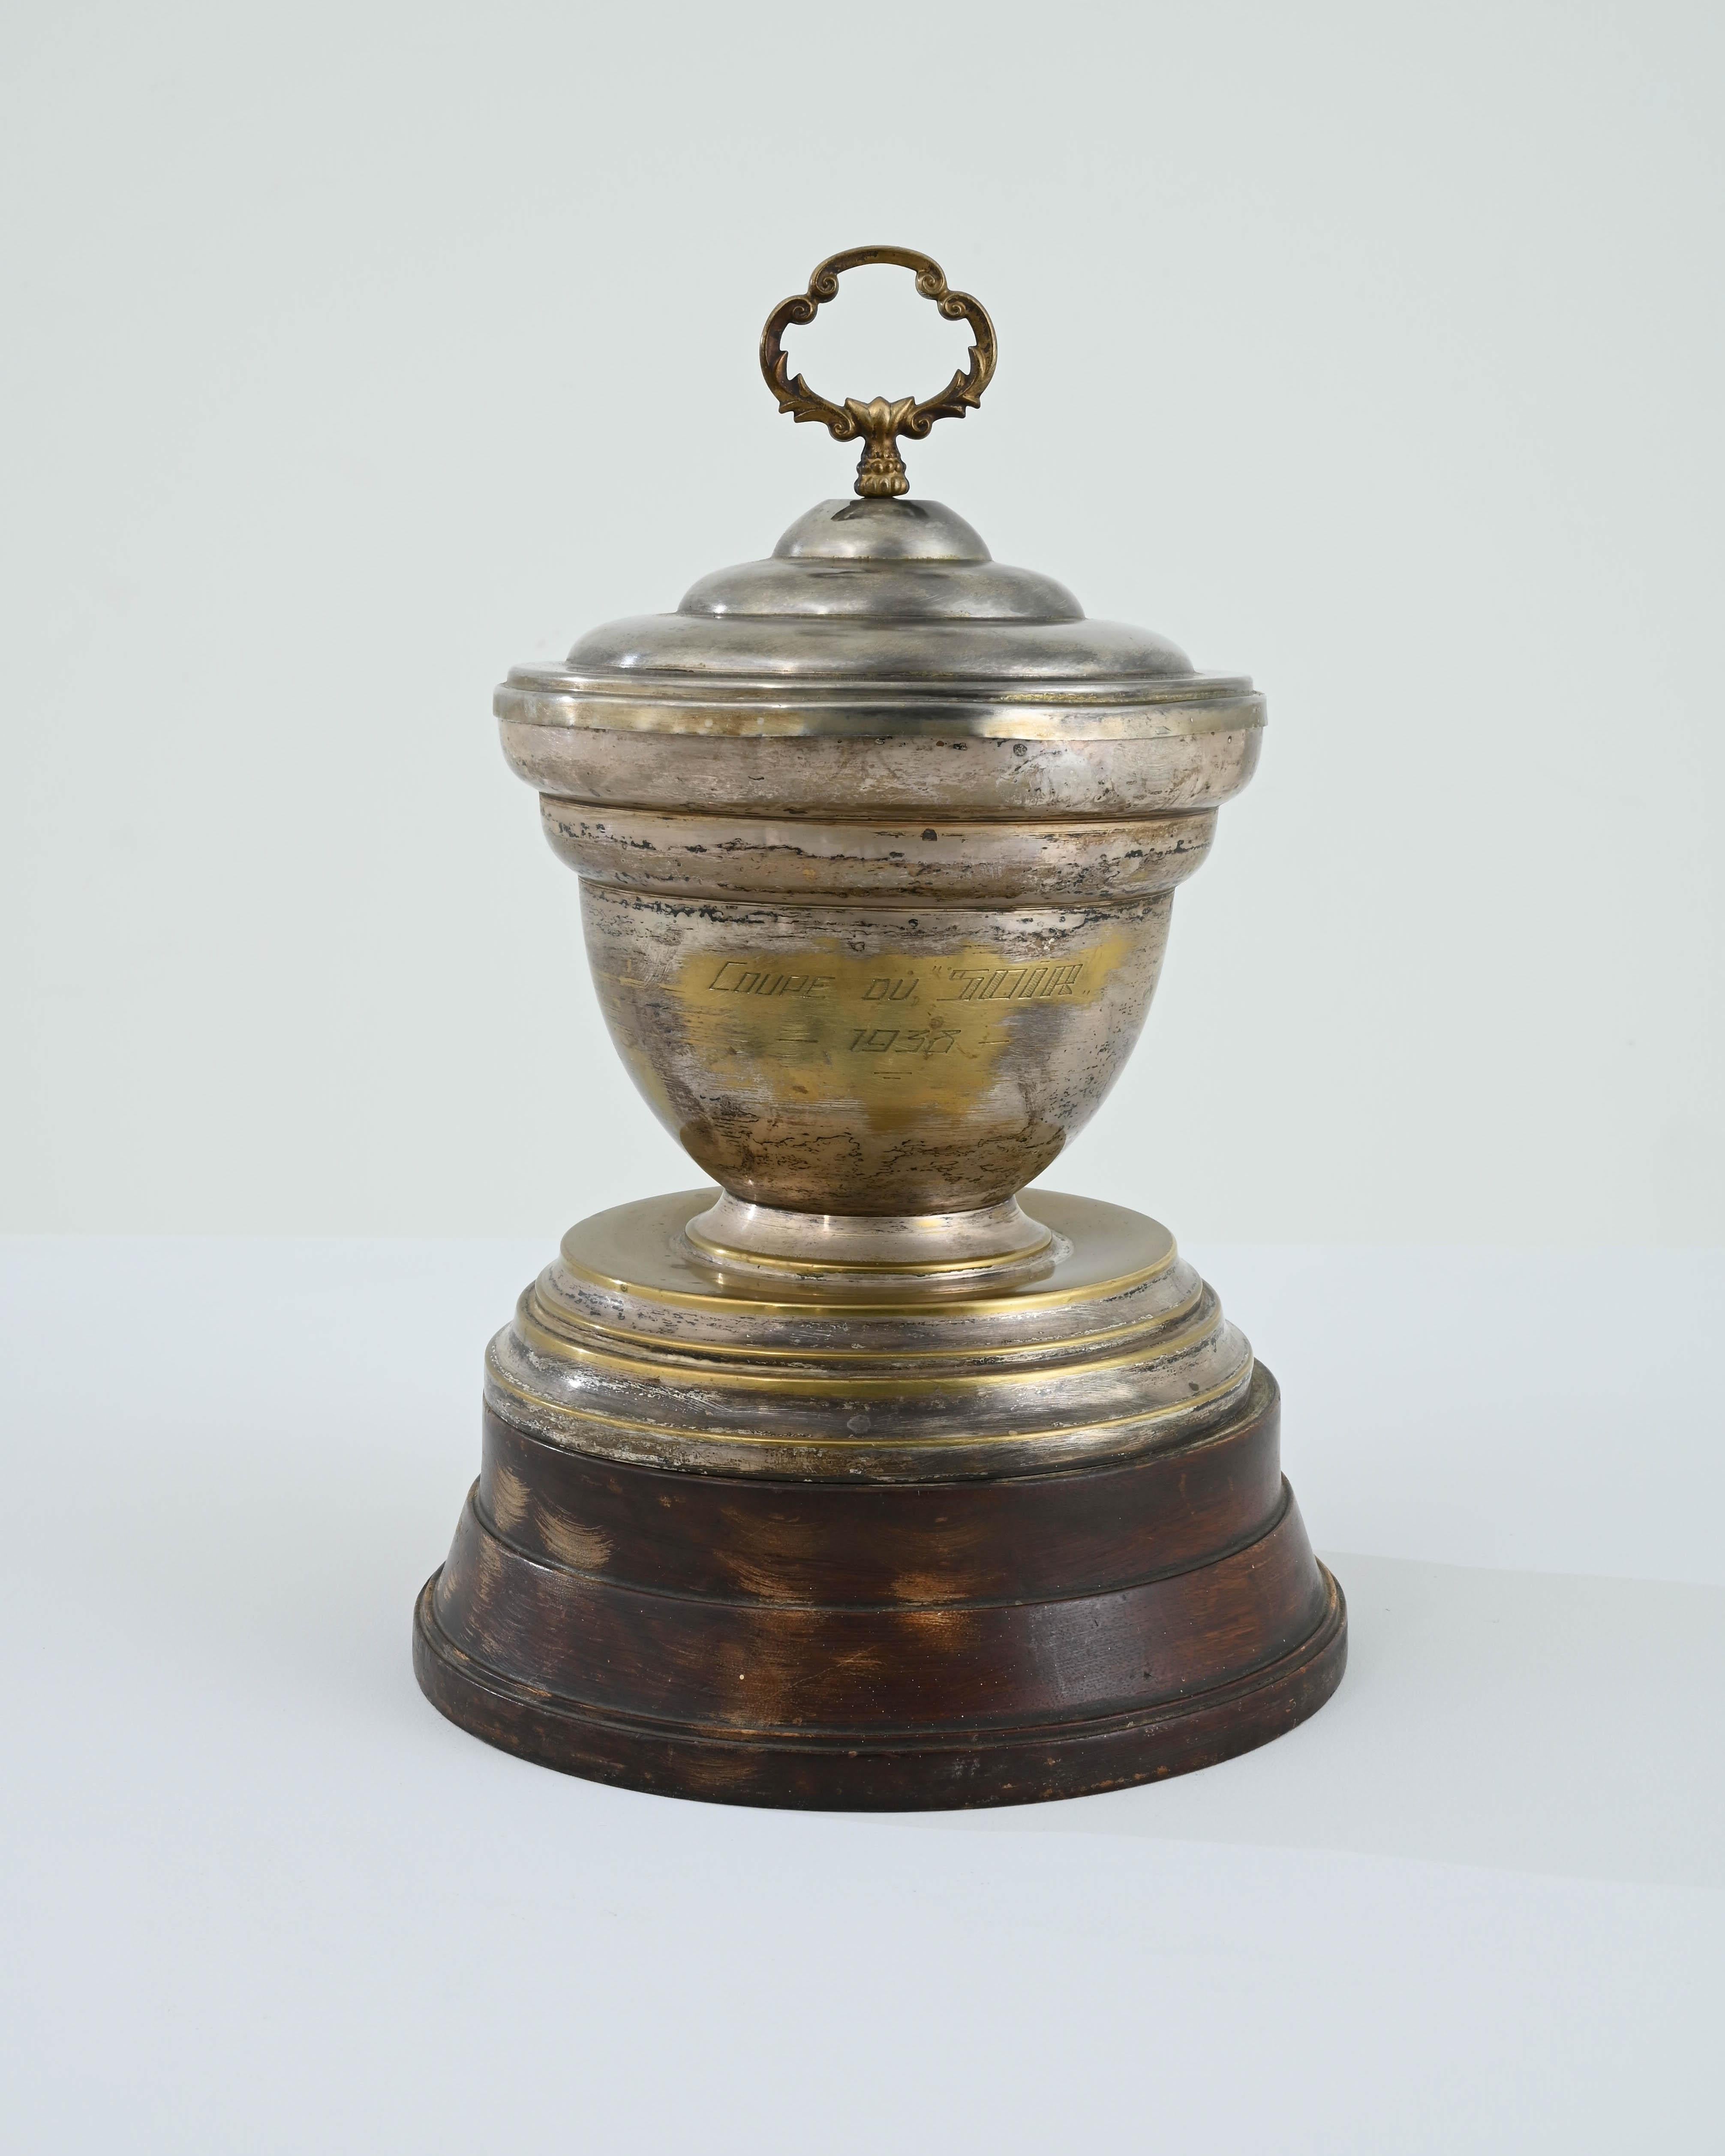 A brass trophy cup from Belgium, circa 1938, standing on a polished wooden base. Emblazoned with the name of the contest, “Coupe du SOIR,” gentle weathering gives a sense of nostalgia to this evocative accent-- passing through the hands of